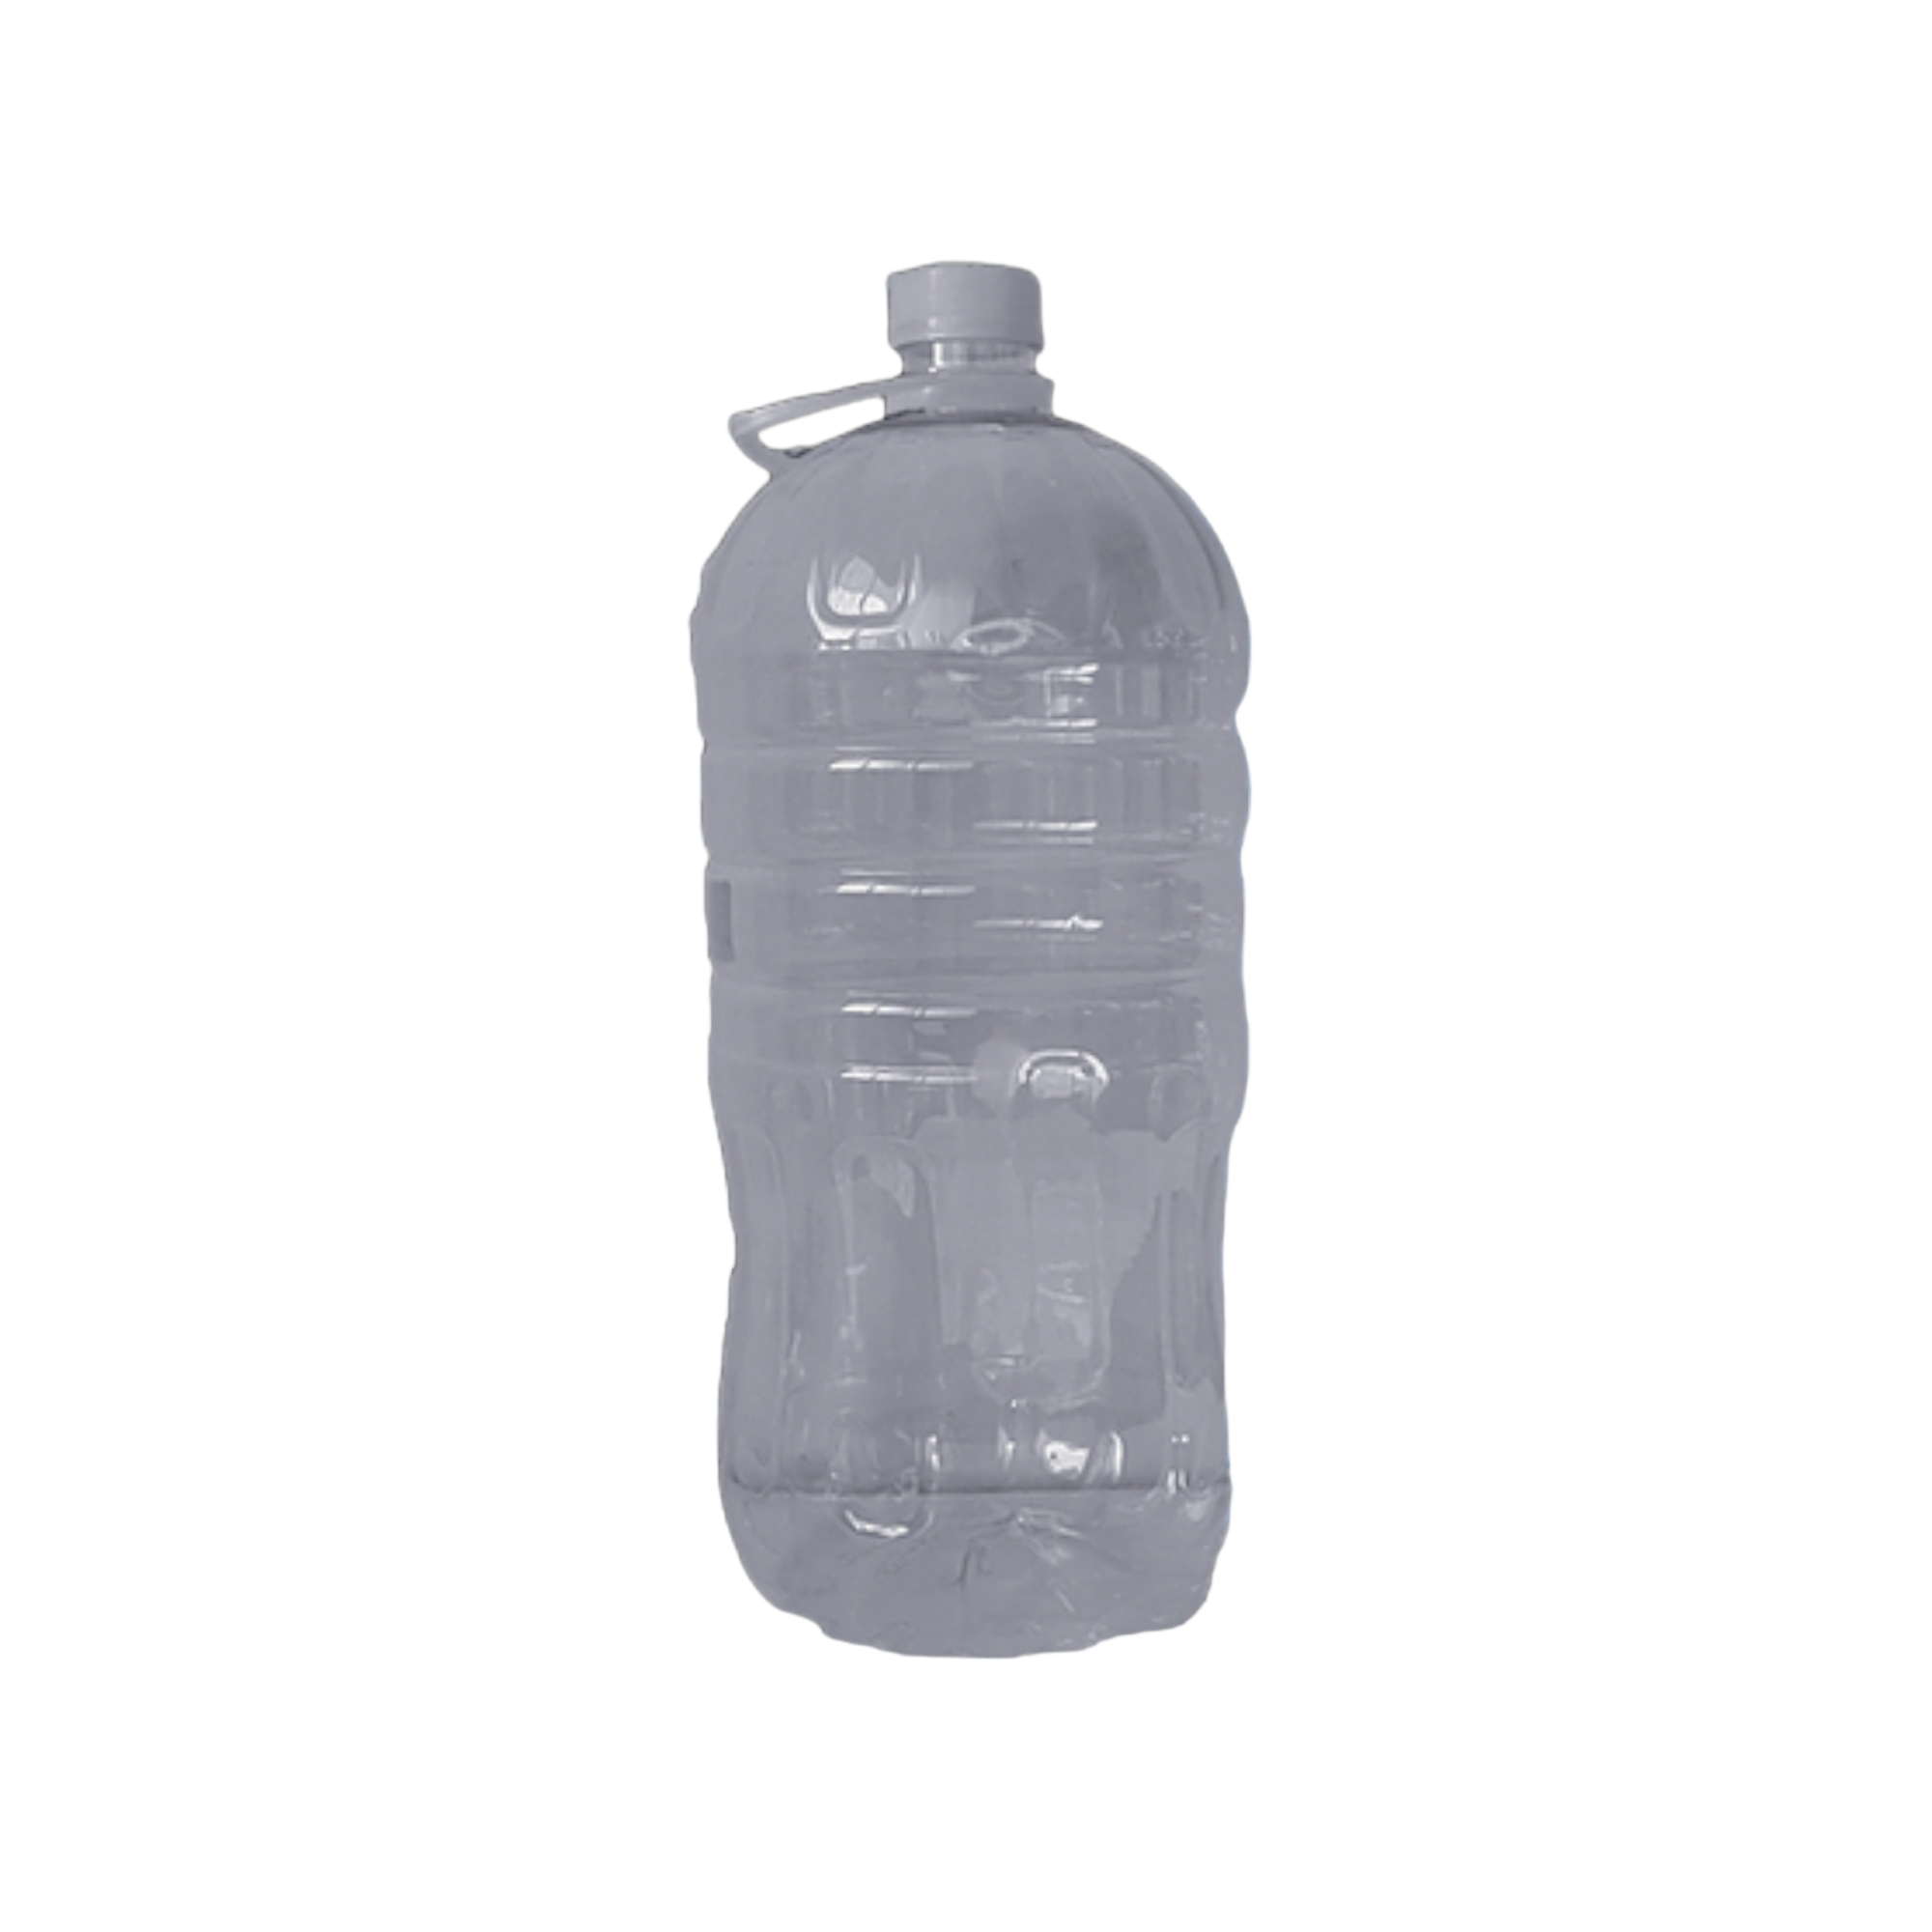 10L Plastic Water Bottle Container Blue with Lid and Tag